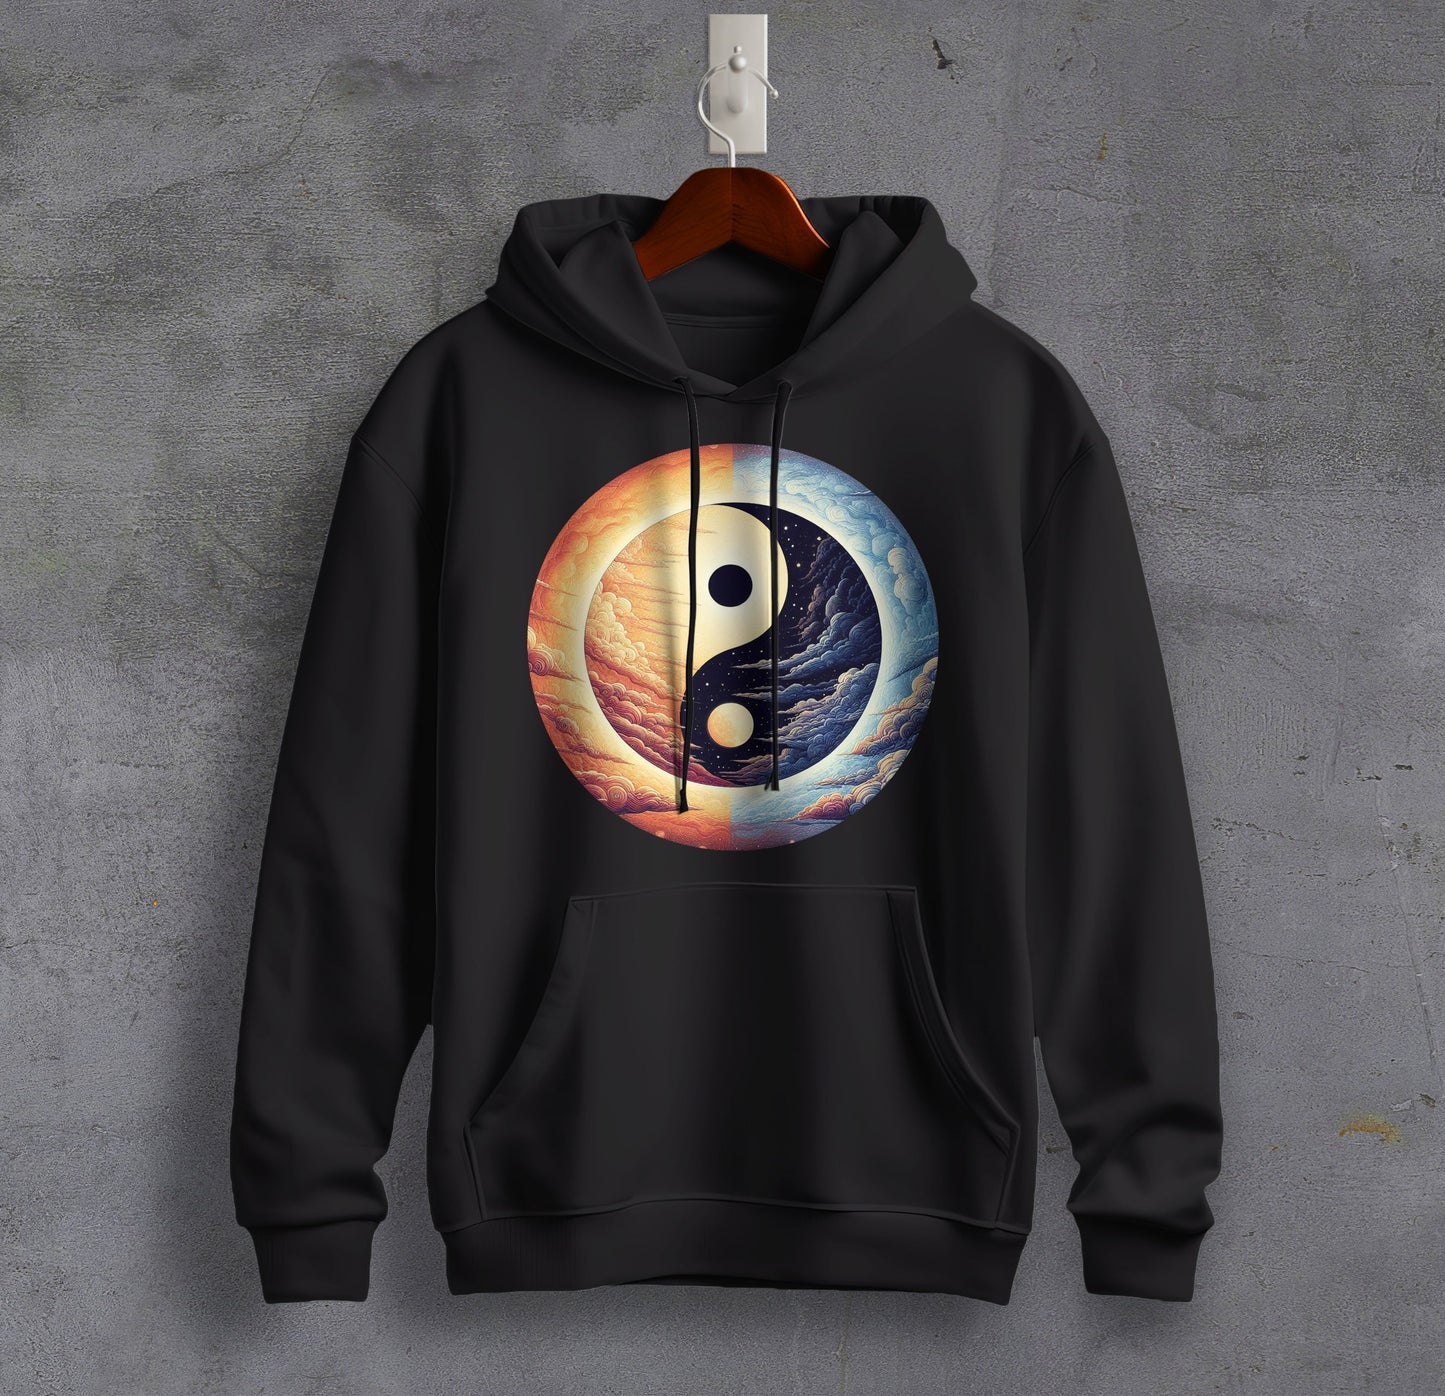 The Yin & The Yang - Graphic Printed Hooded Sweat Shirt for Men - Cotton - Cosmos Sweat Shirt 🪐 ☀️ ☯️ 🌘🌑🌒